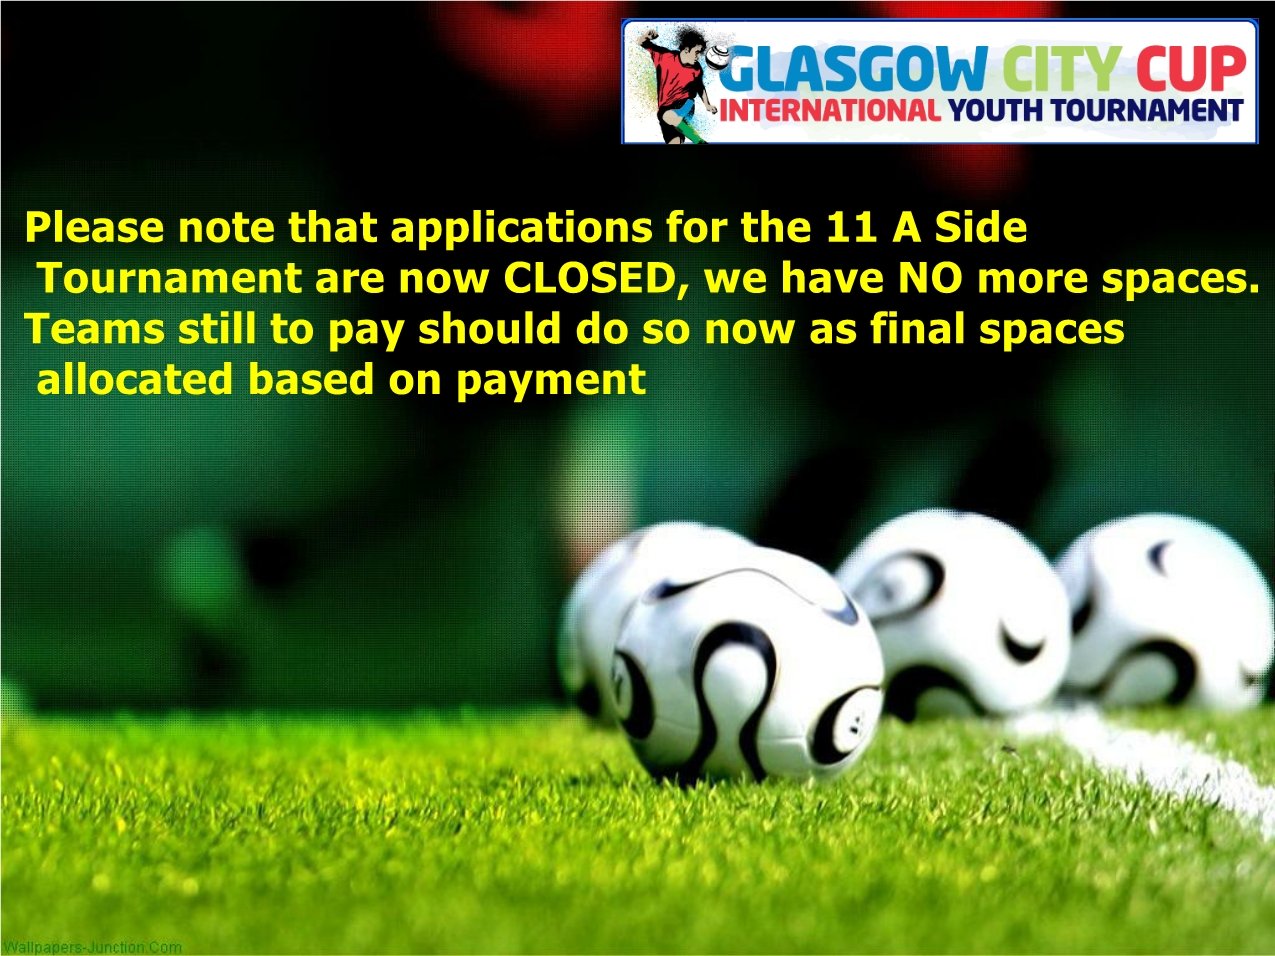 11 A Side Applications - Now Closed